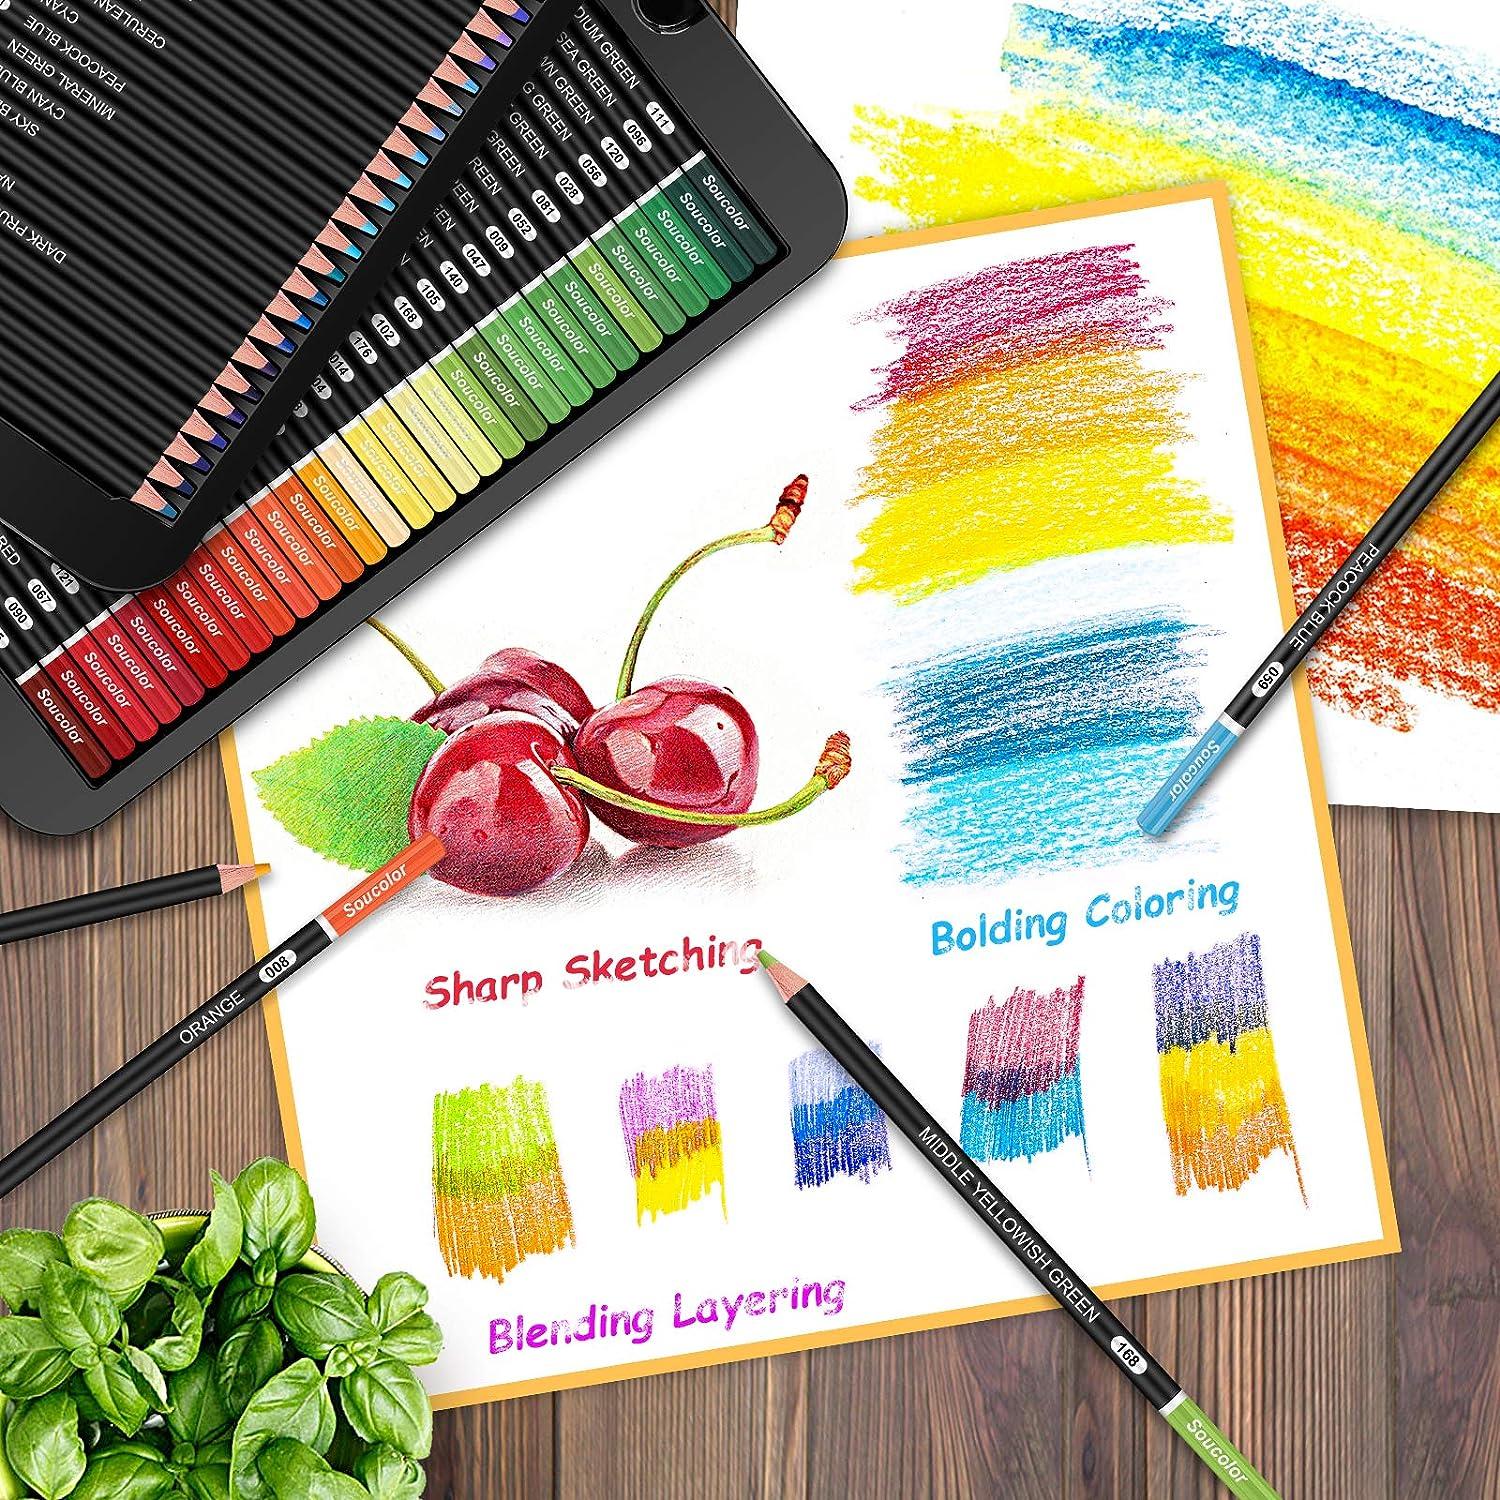 Soucolor Art Supplies, 283 Pieces Drawing Set Art Kits with